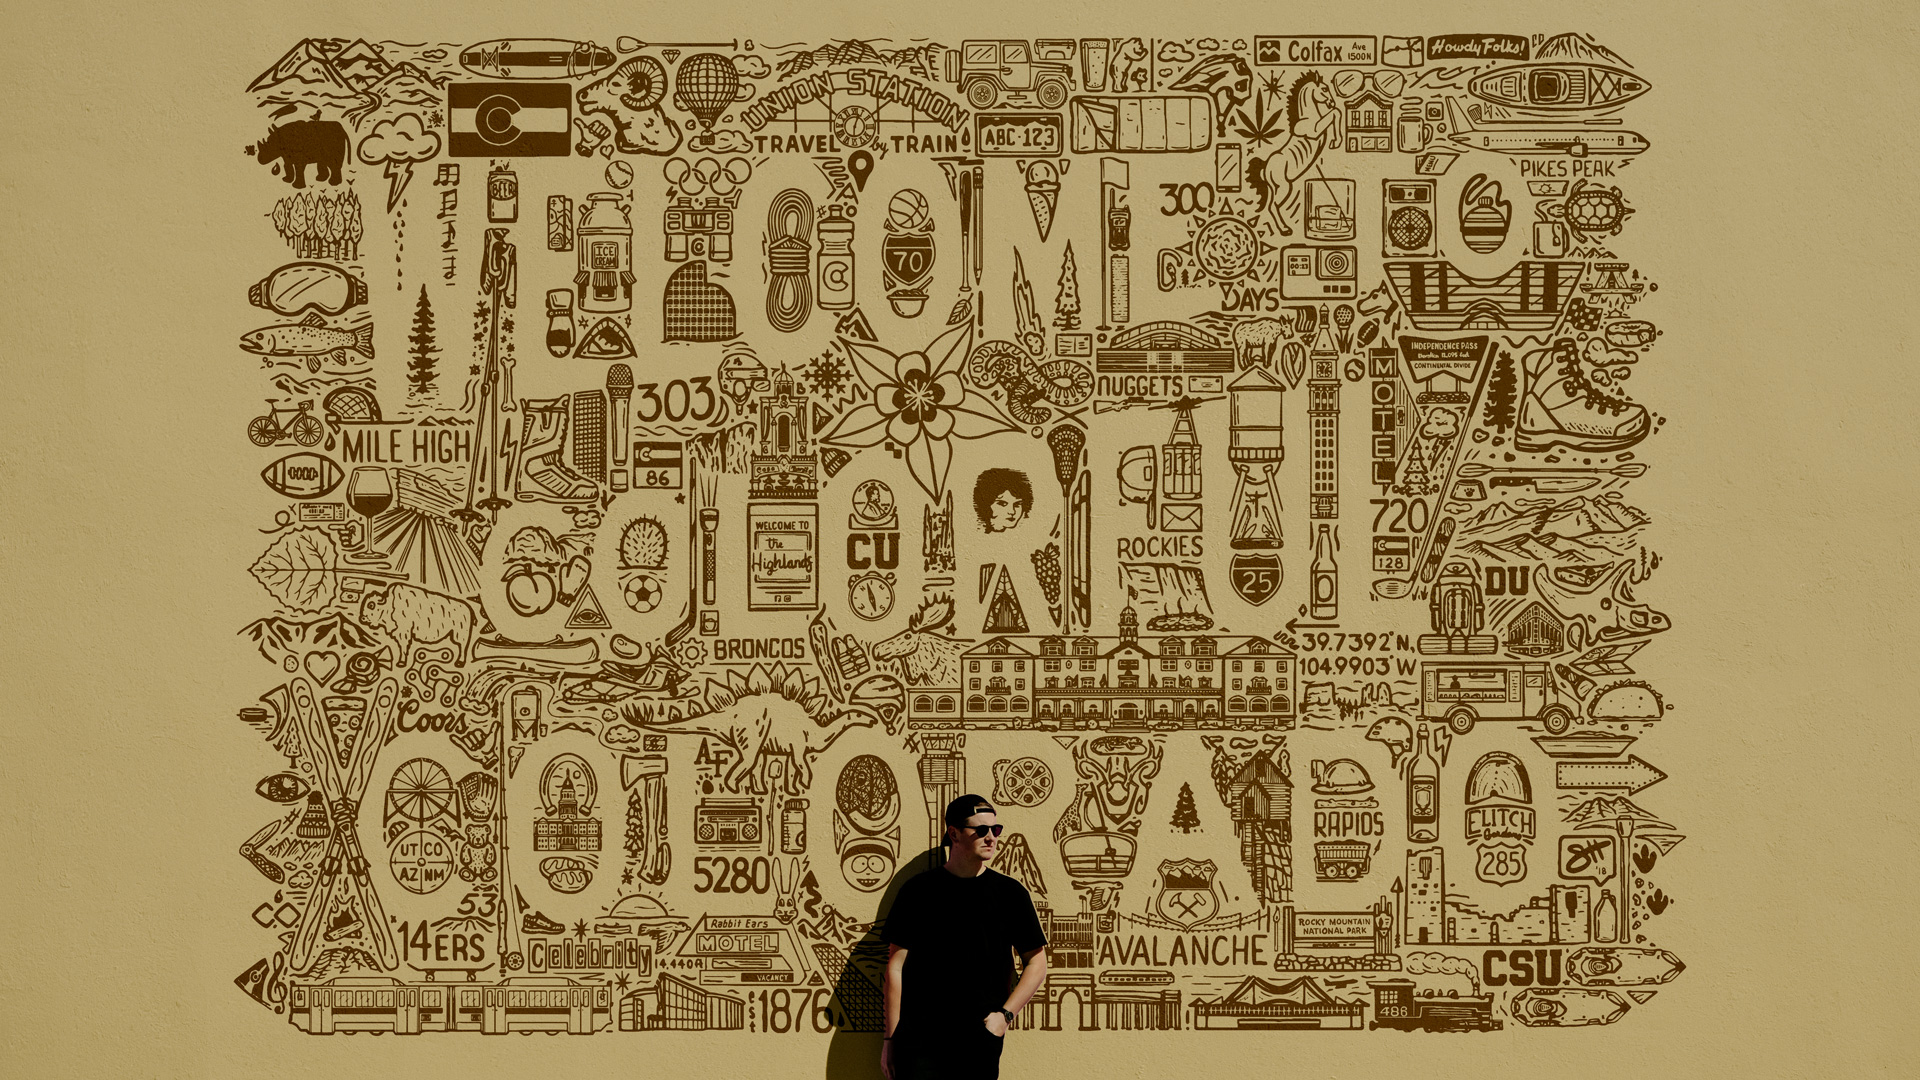 Welcome to Colorado Mural